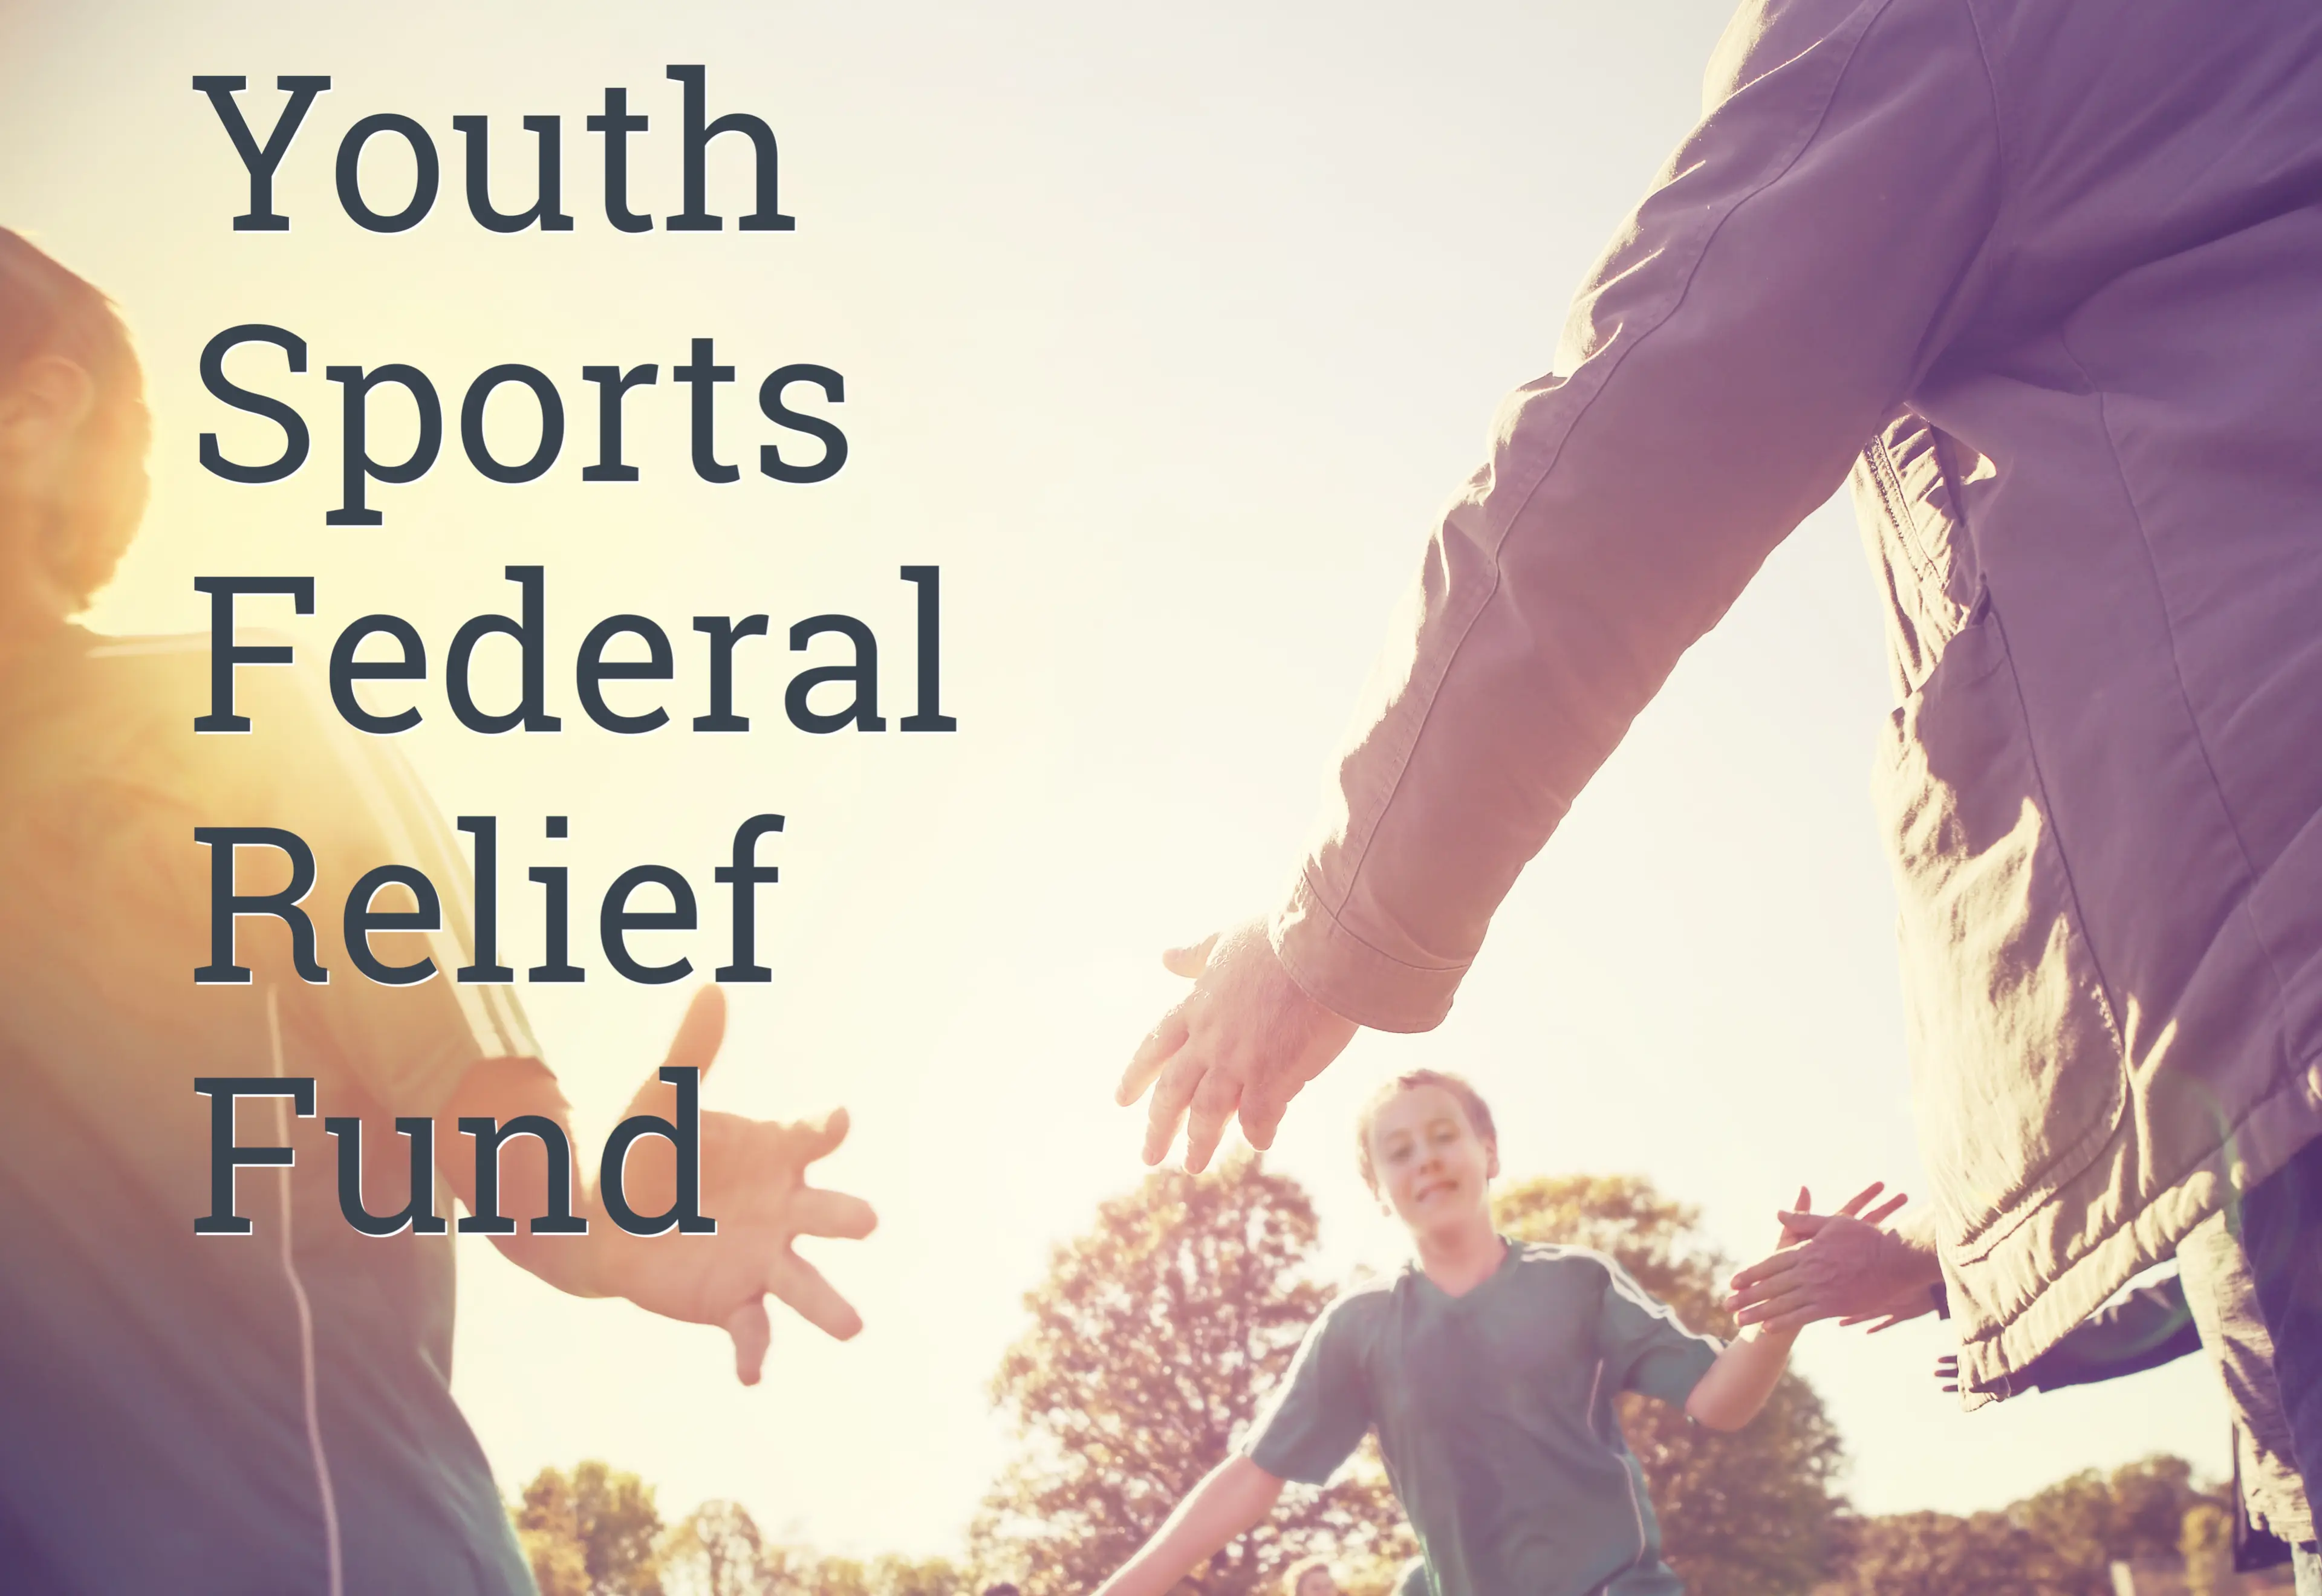 Featured image: How to Take Action on the Youth Sports Federal Relief Fund